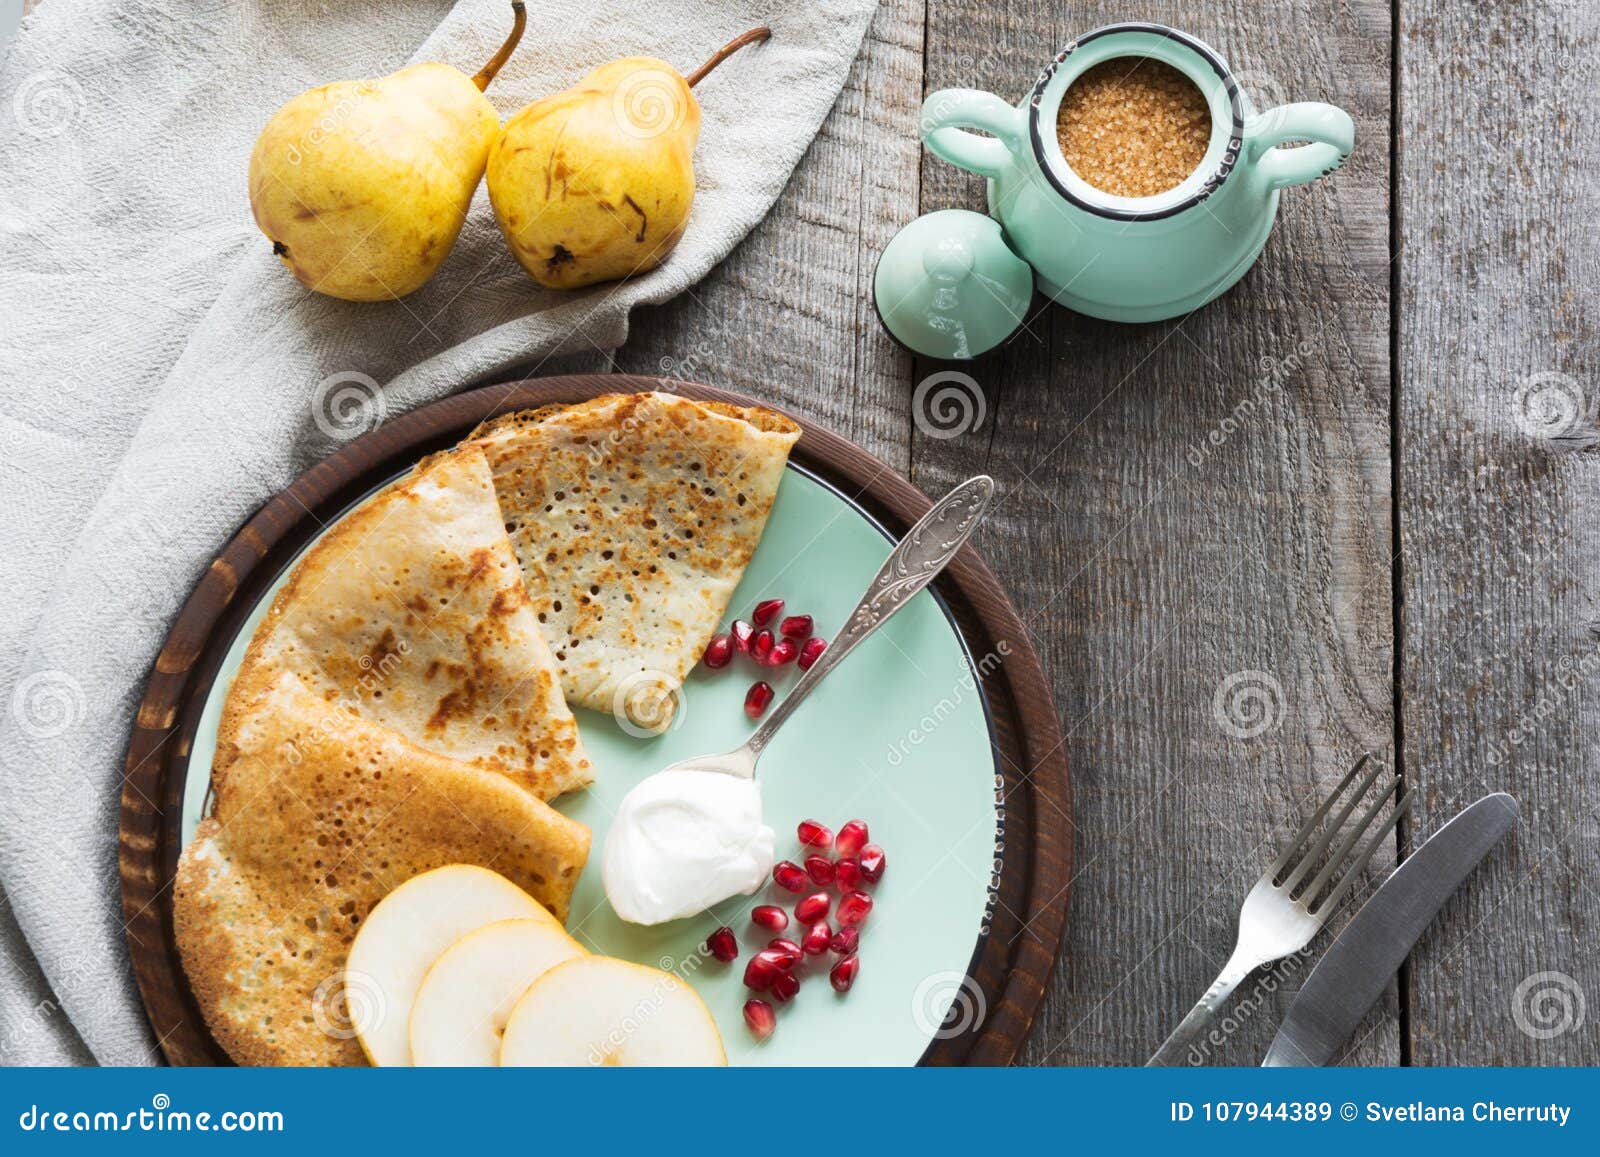 Tasty Traditional Russian Breakfast of Pancakes with Honey on Plate. Rustic  Style. Copy Space. Stock Image - Image of celebration, copyspace: 107944389